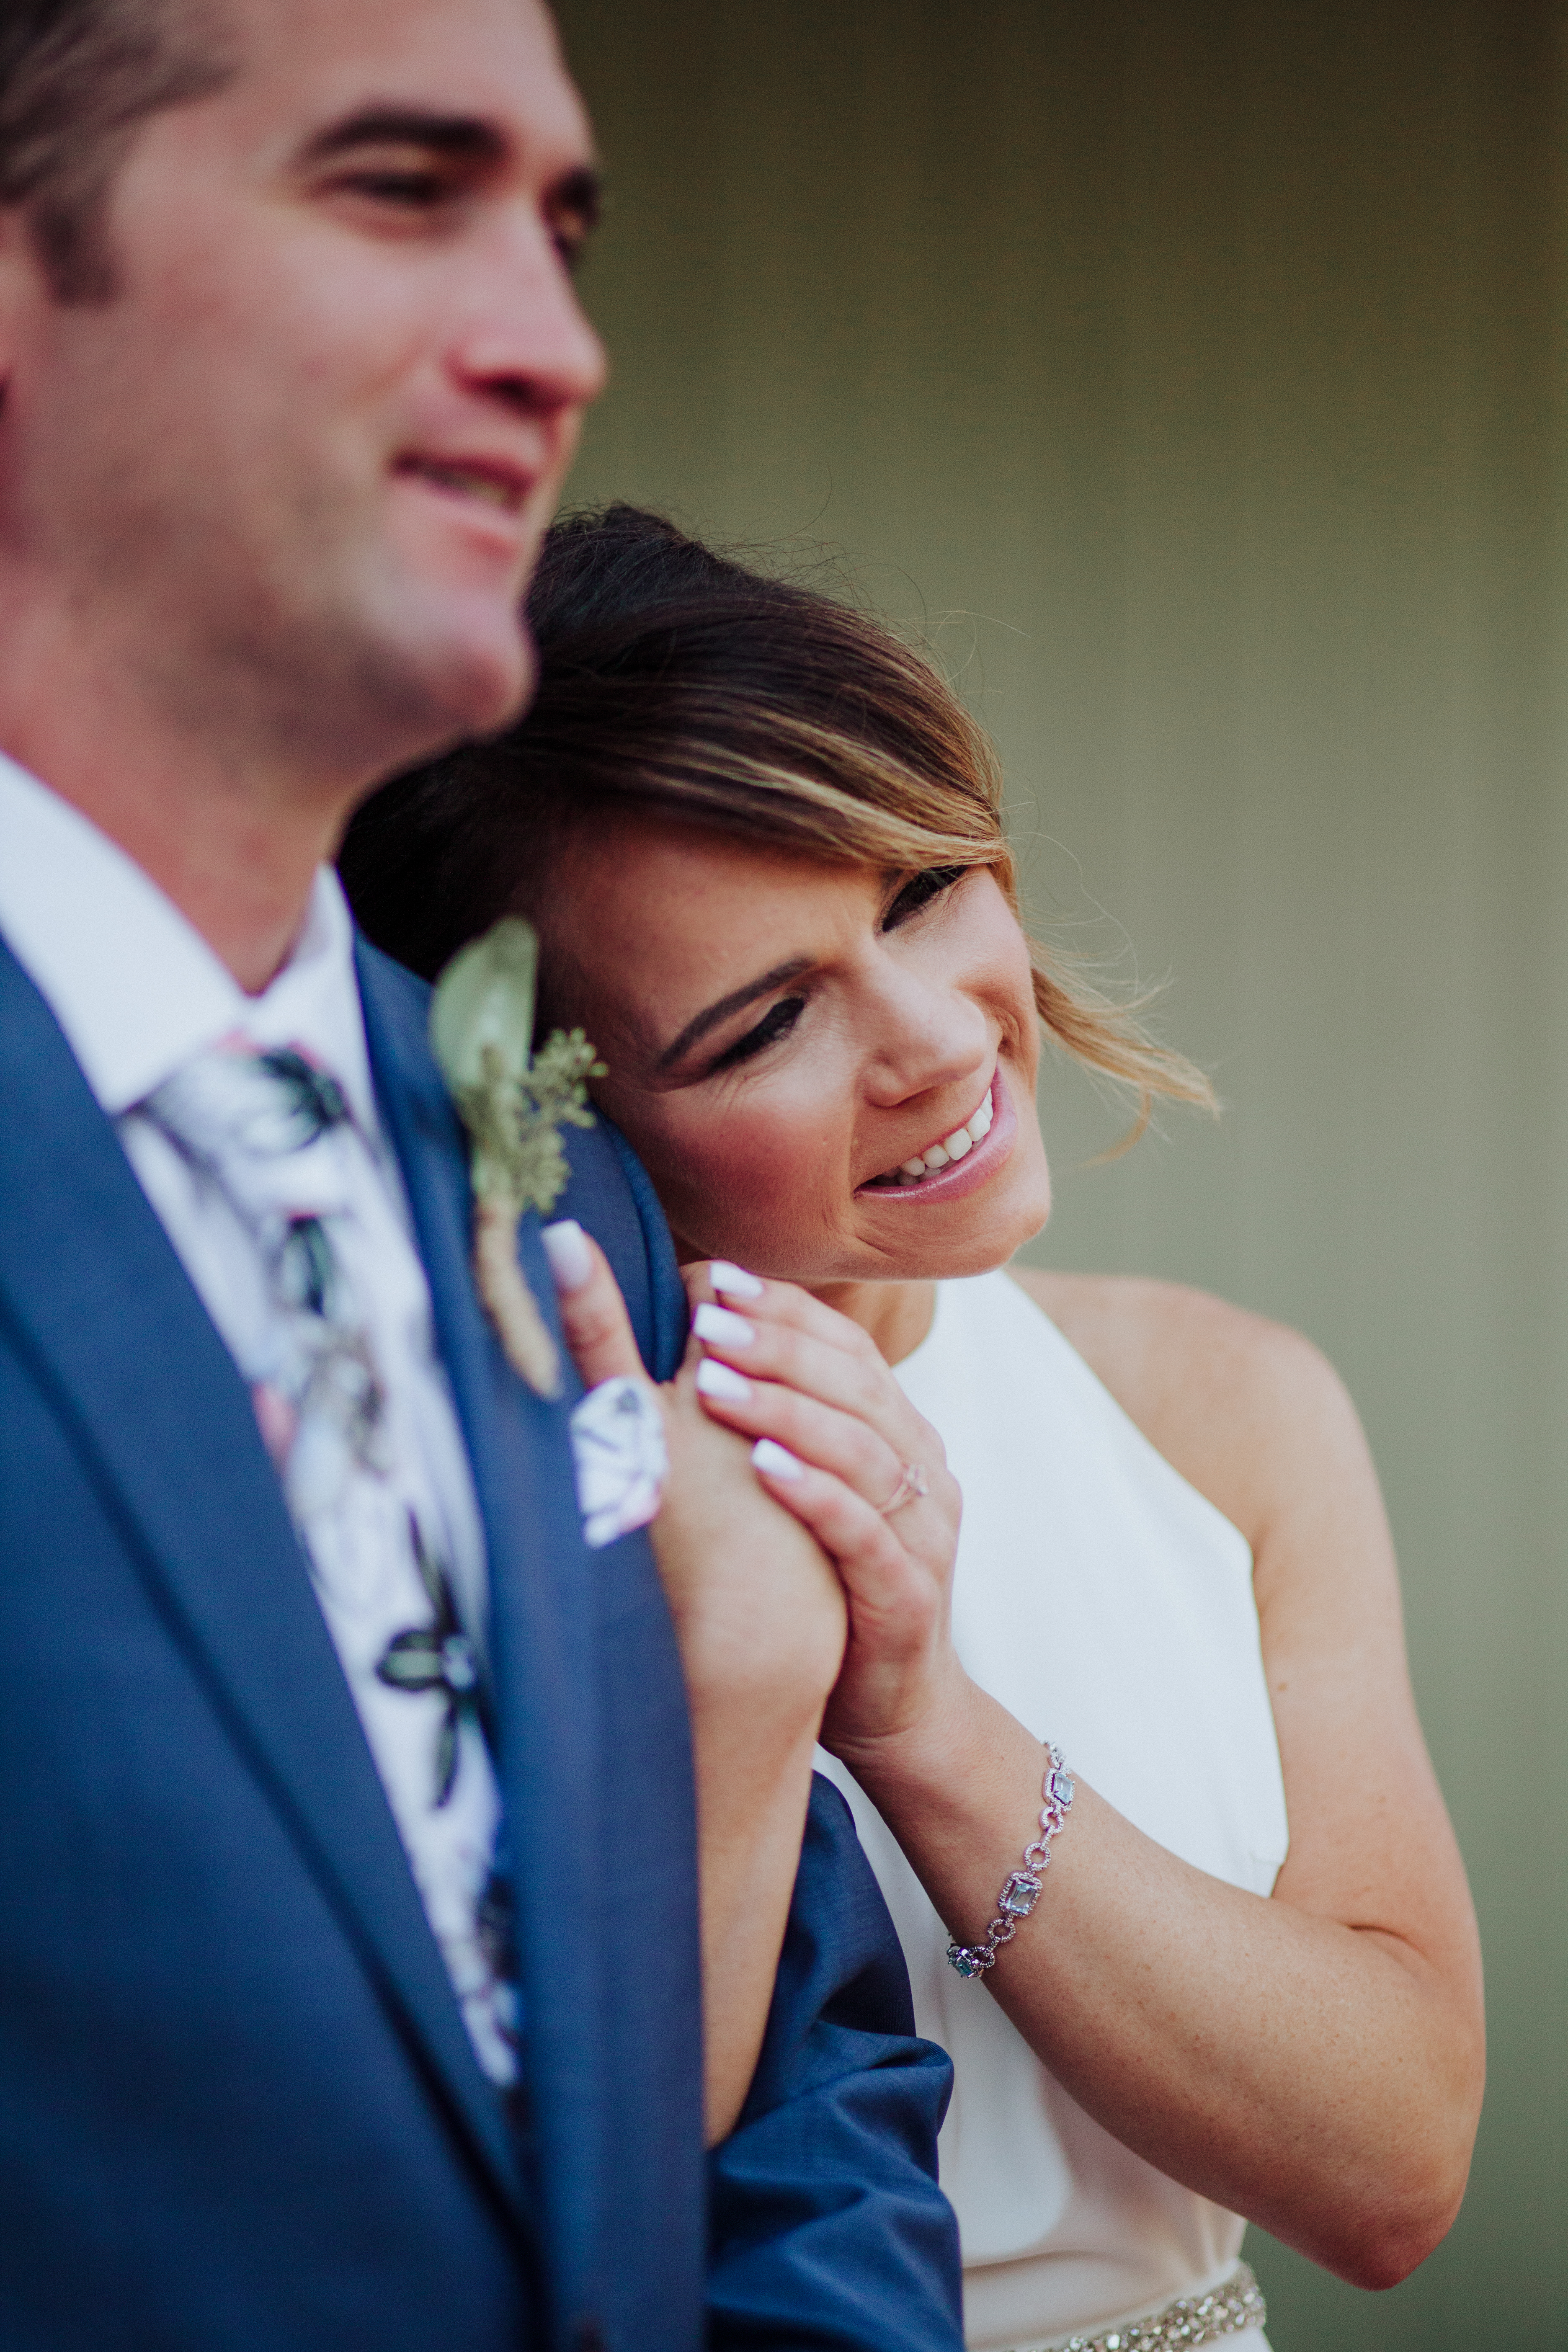 Bride and groom portraitsat a Romantic Style San Diego Wedding at Marina Village by Kylie Rae Photography